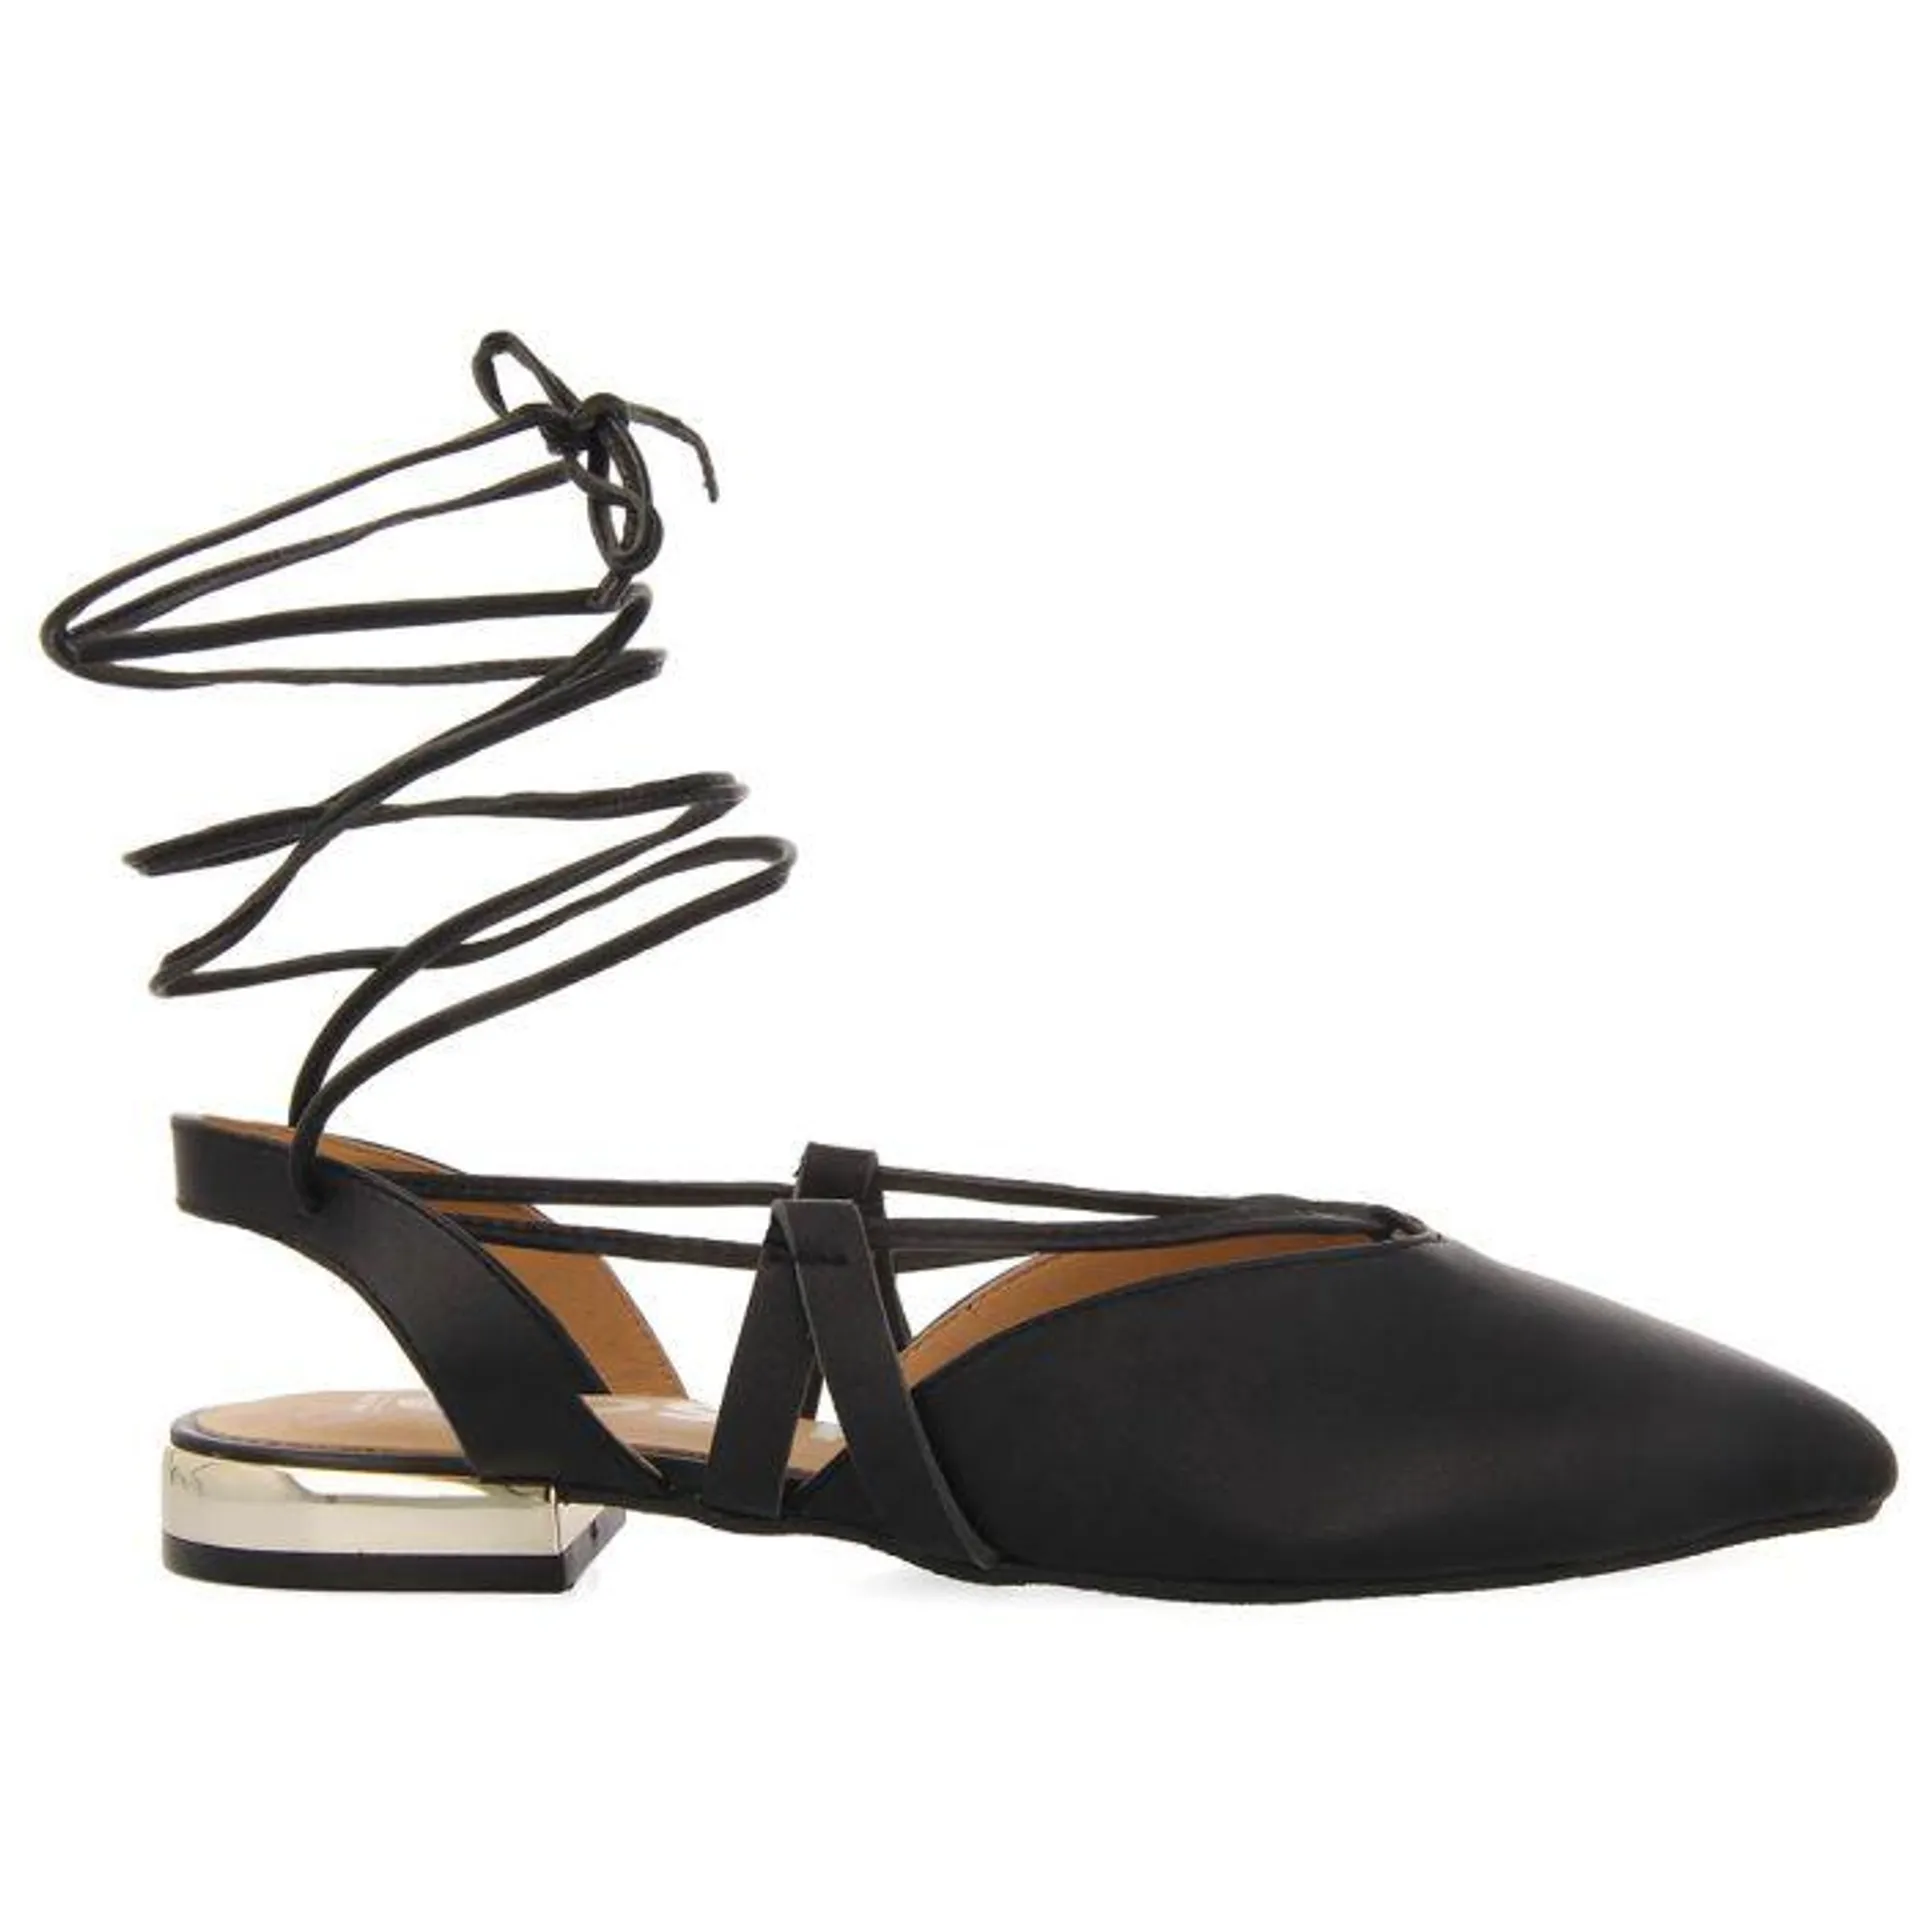 Rodelas women's black leather slingback ballet flats with laces